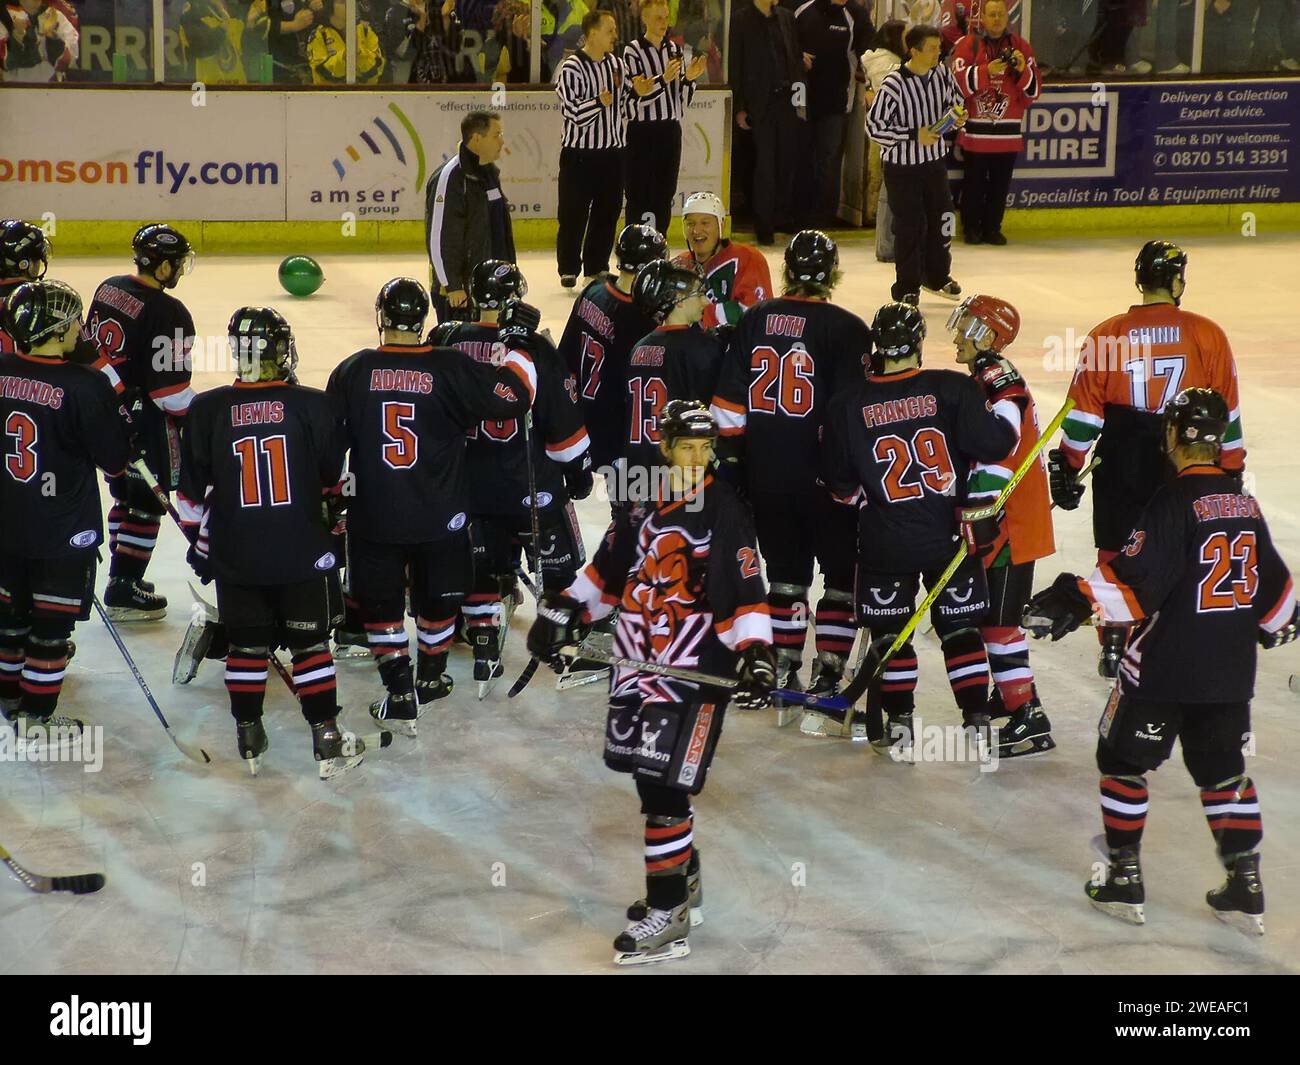 Cardiff Devils Ice hockey team, End of an era match at the Wales national Ice rink in Cardiff Wales 4th April 2006 Stock Photo